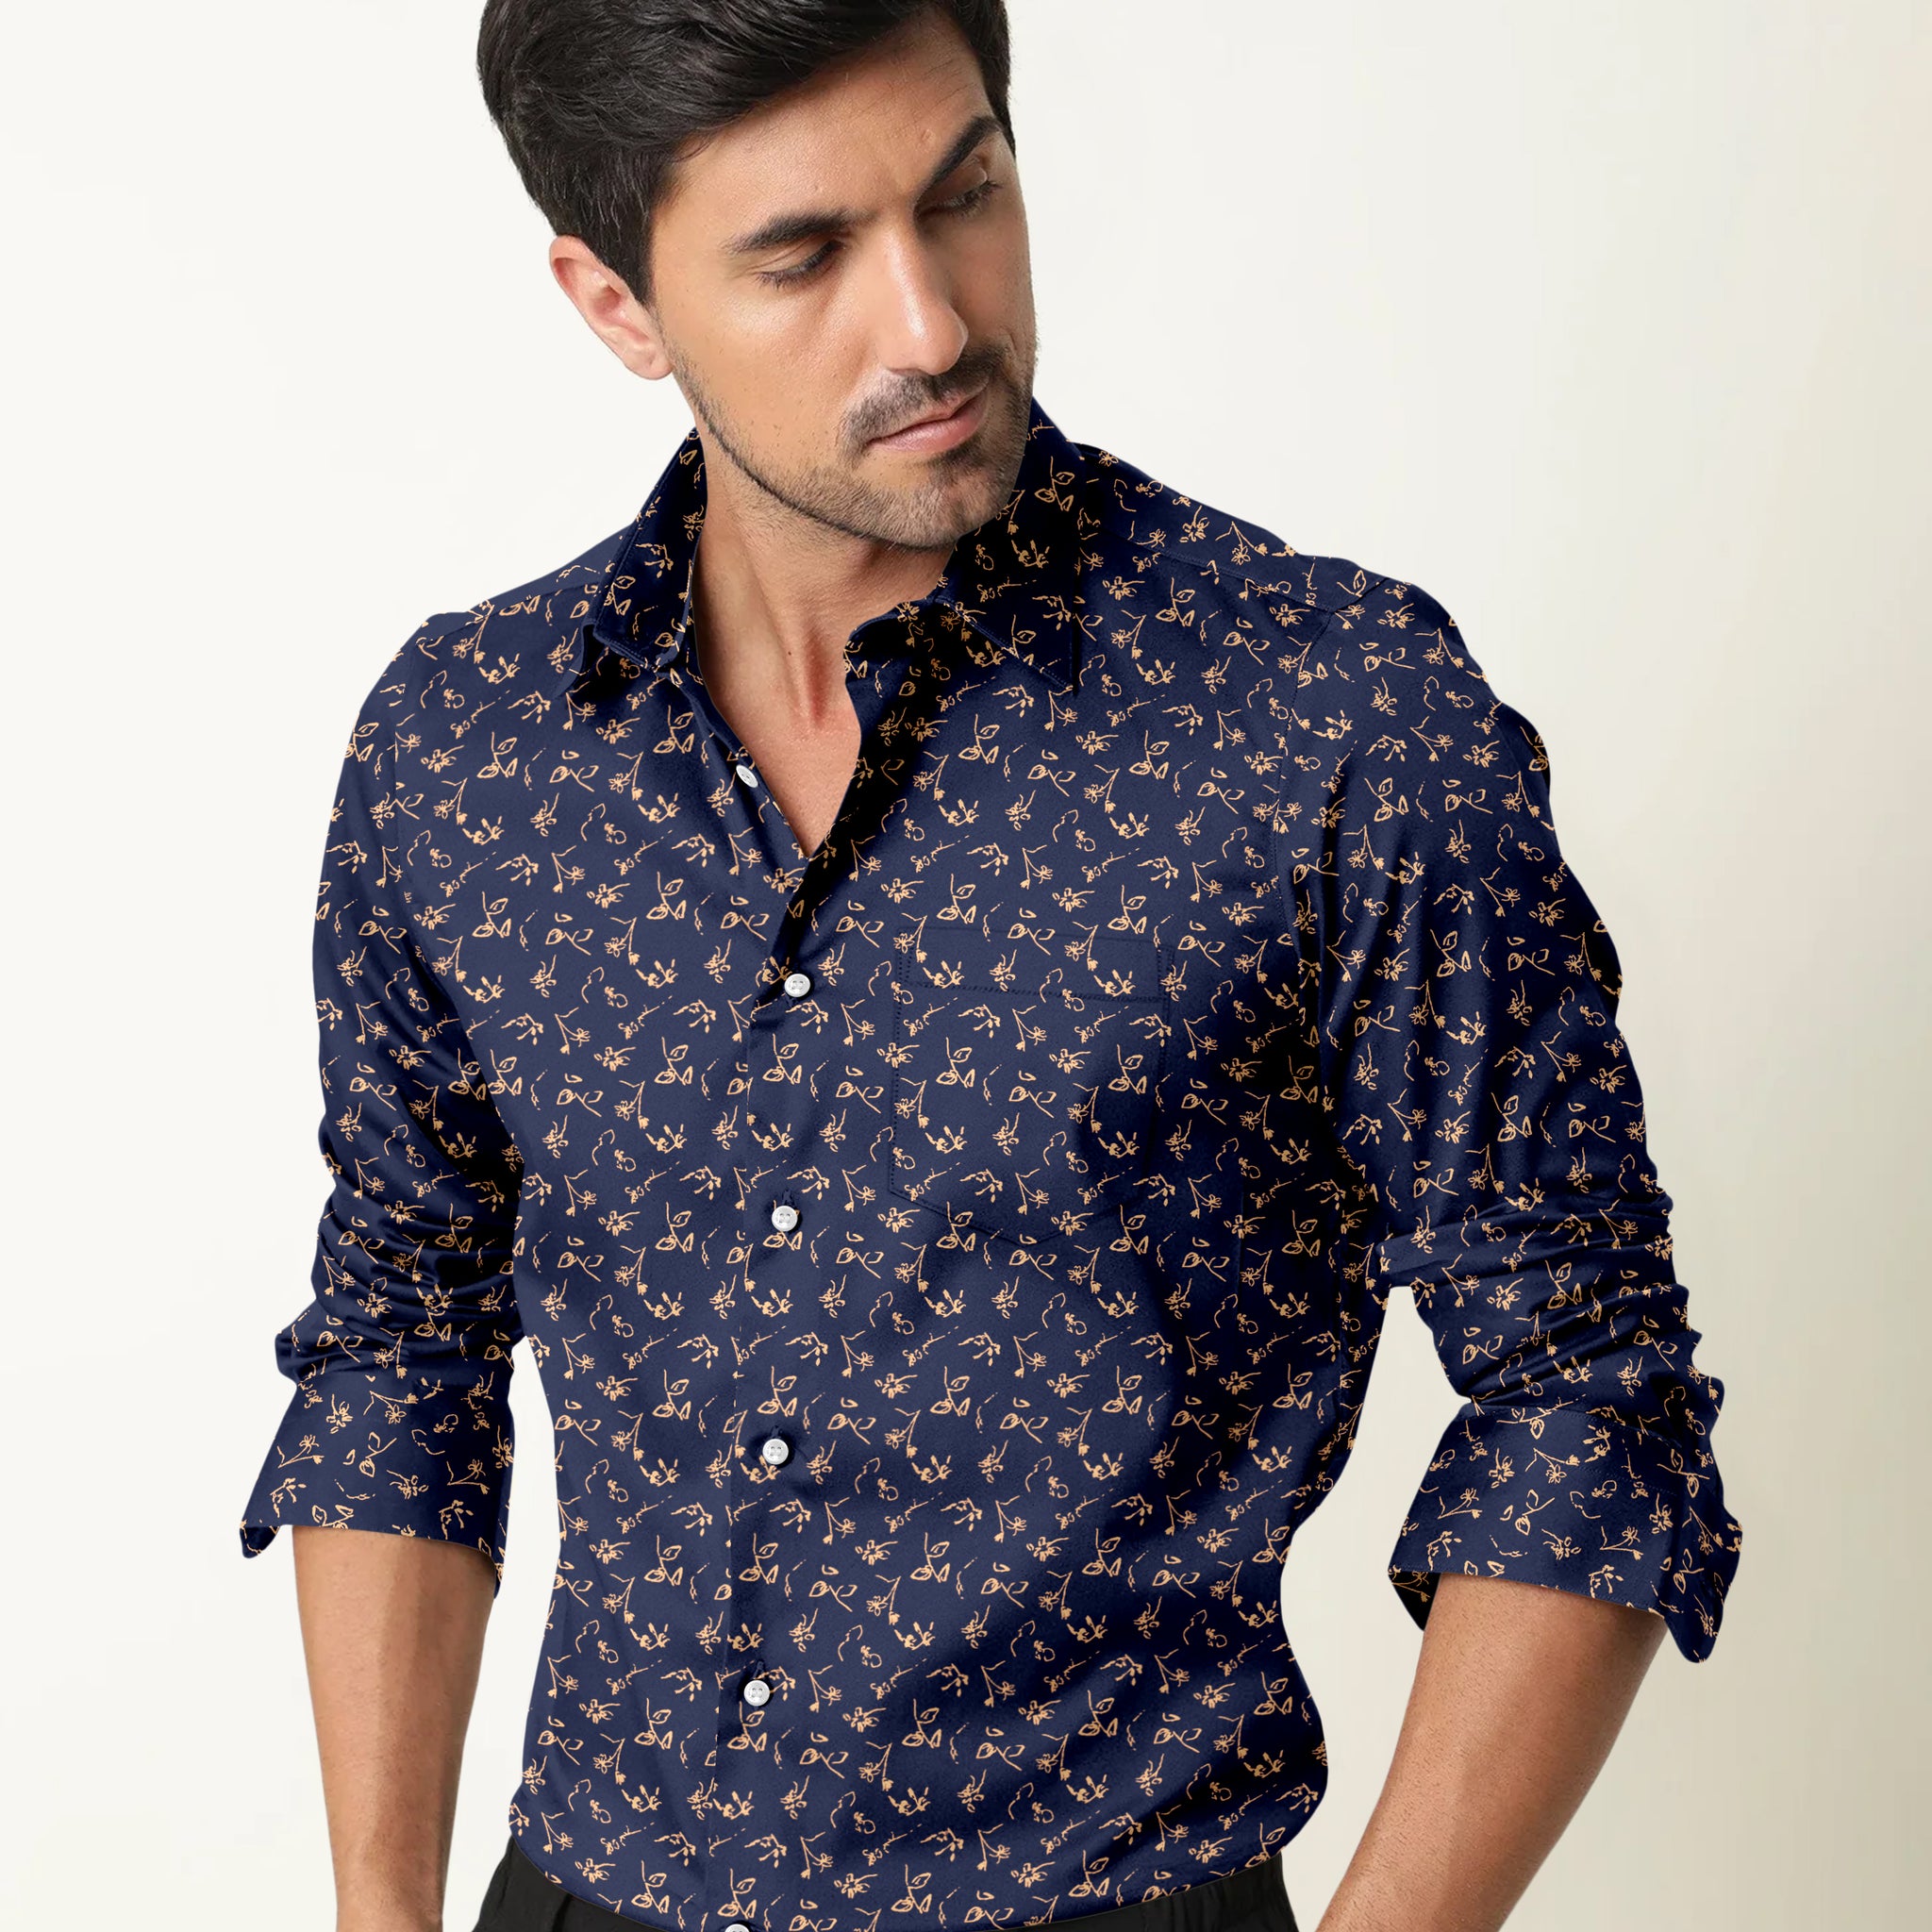 Floral Artistry Printed on Navy Blue Shirt